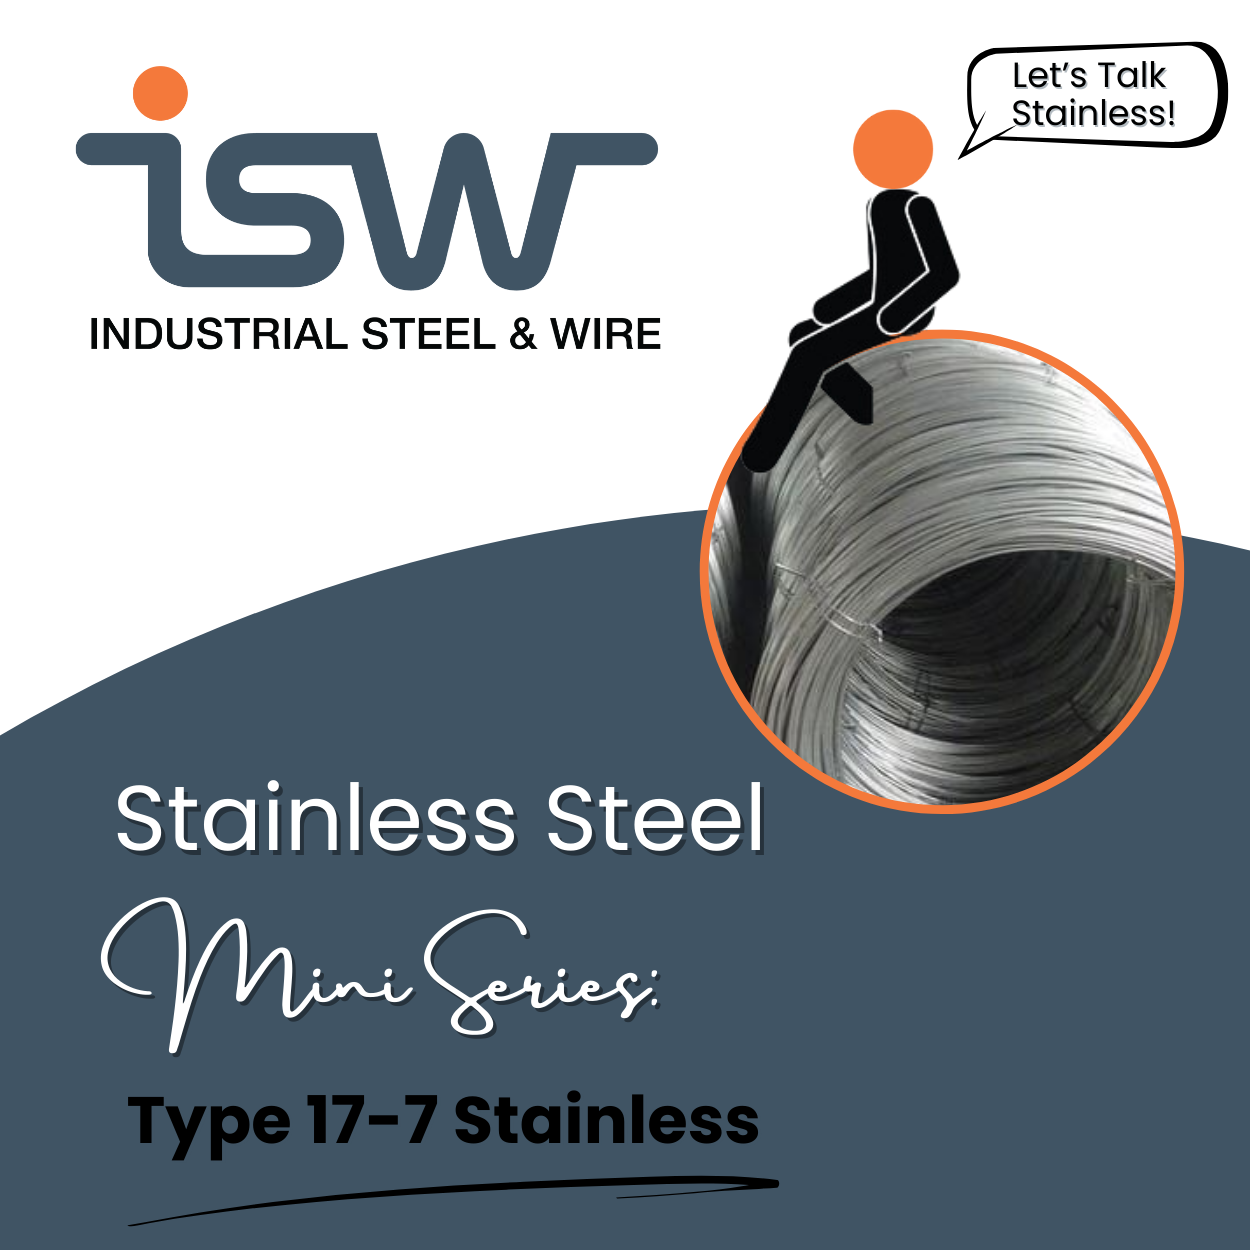 17-7 Stainless Steel